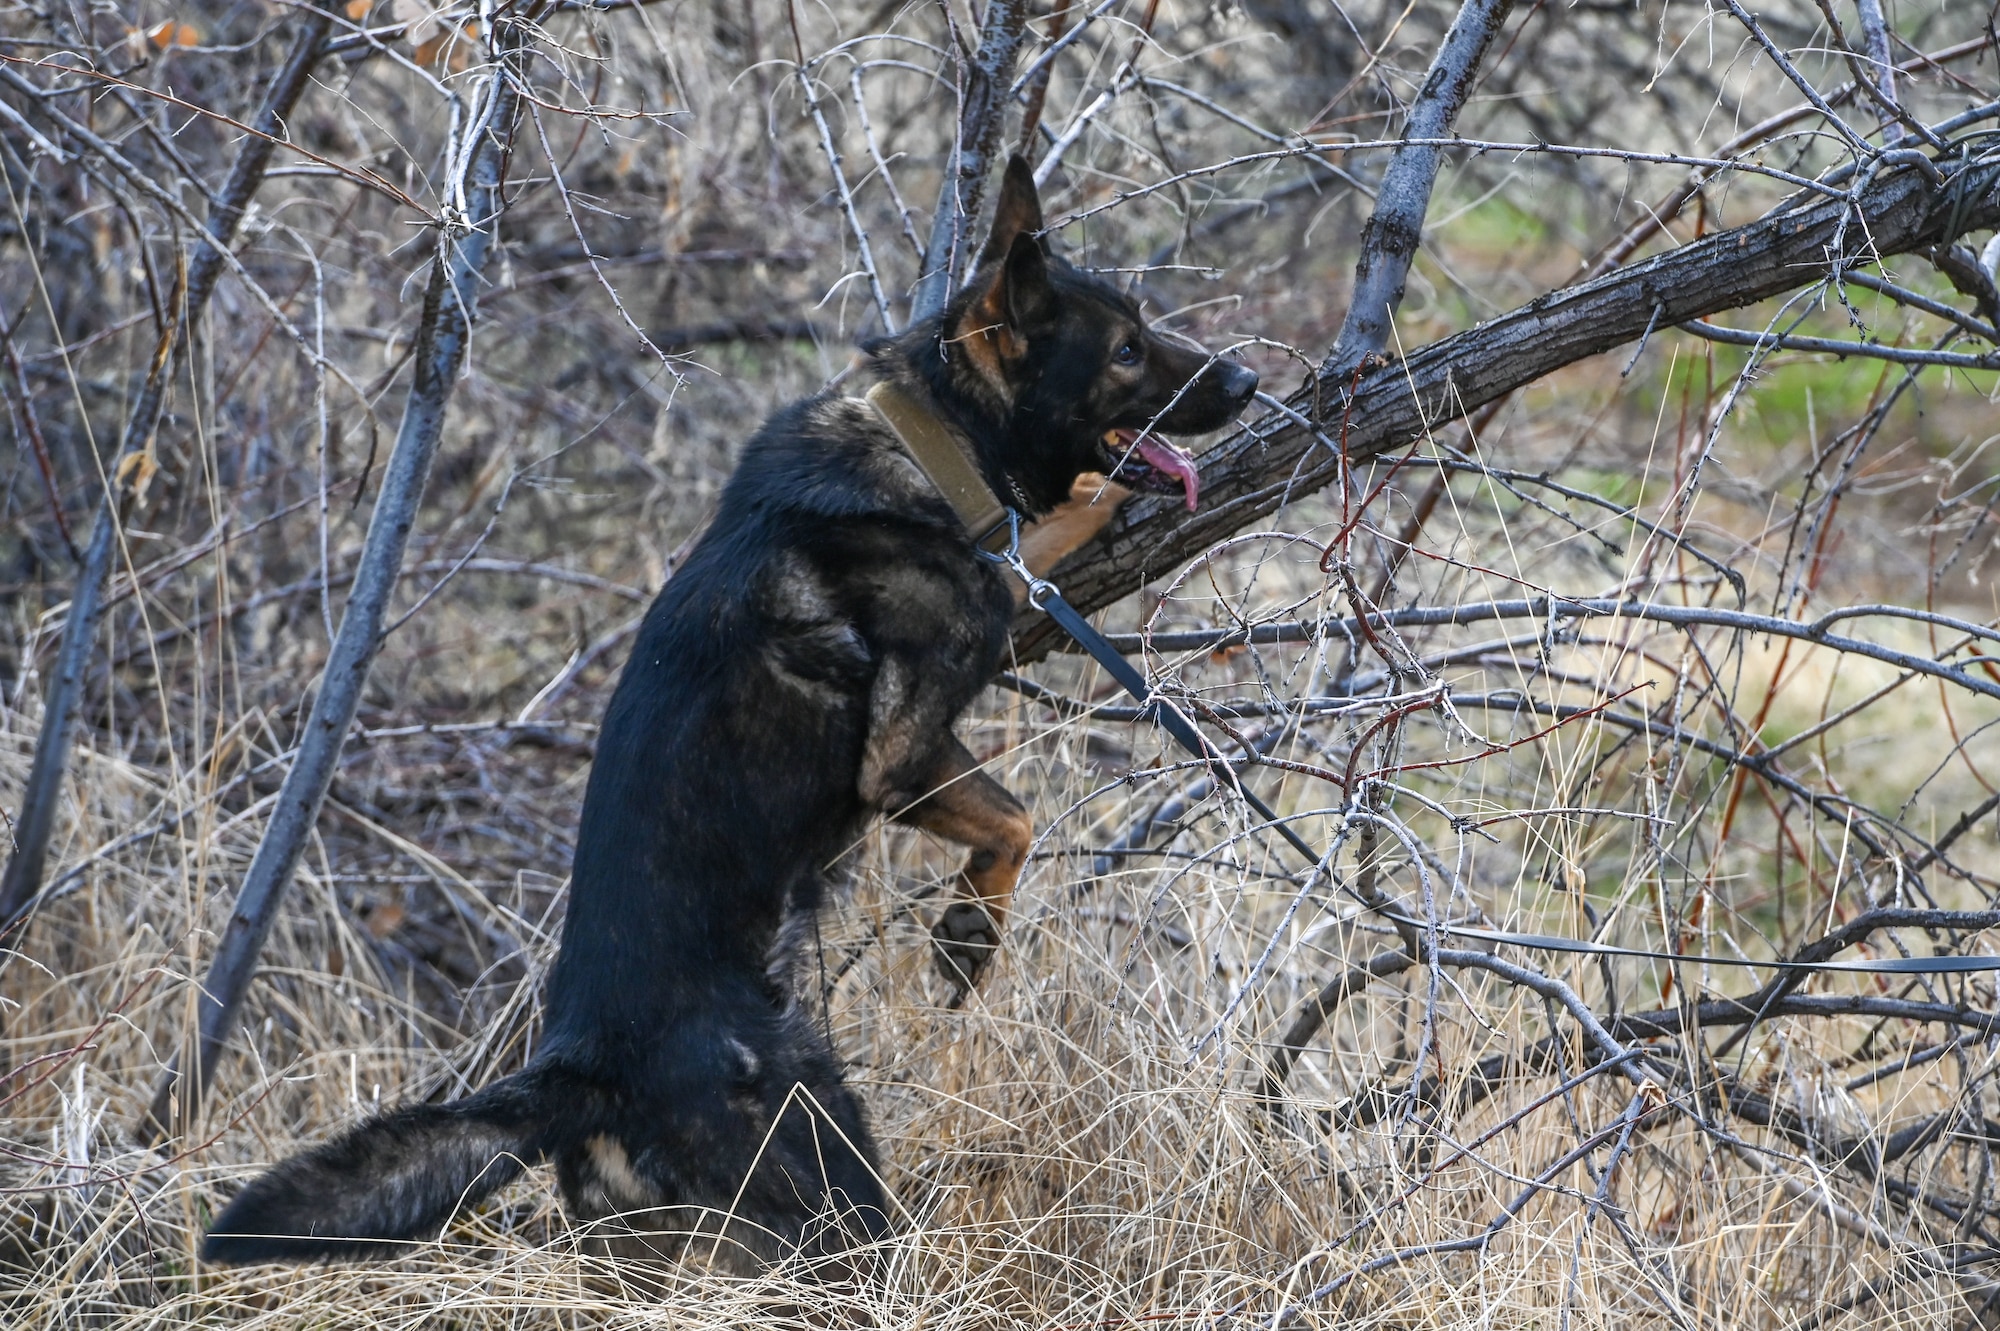 Military Working Dog Jimo, 75th Security Forces Squadron, sniffs out explosive making materials in a tree during training March 10, 2021, at Hill Air Force Base, Utah.(U.S. Air Force photo by Cynthia Griggs)